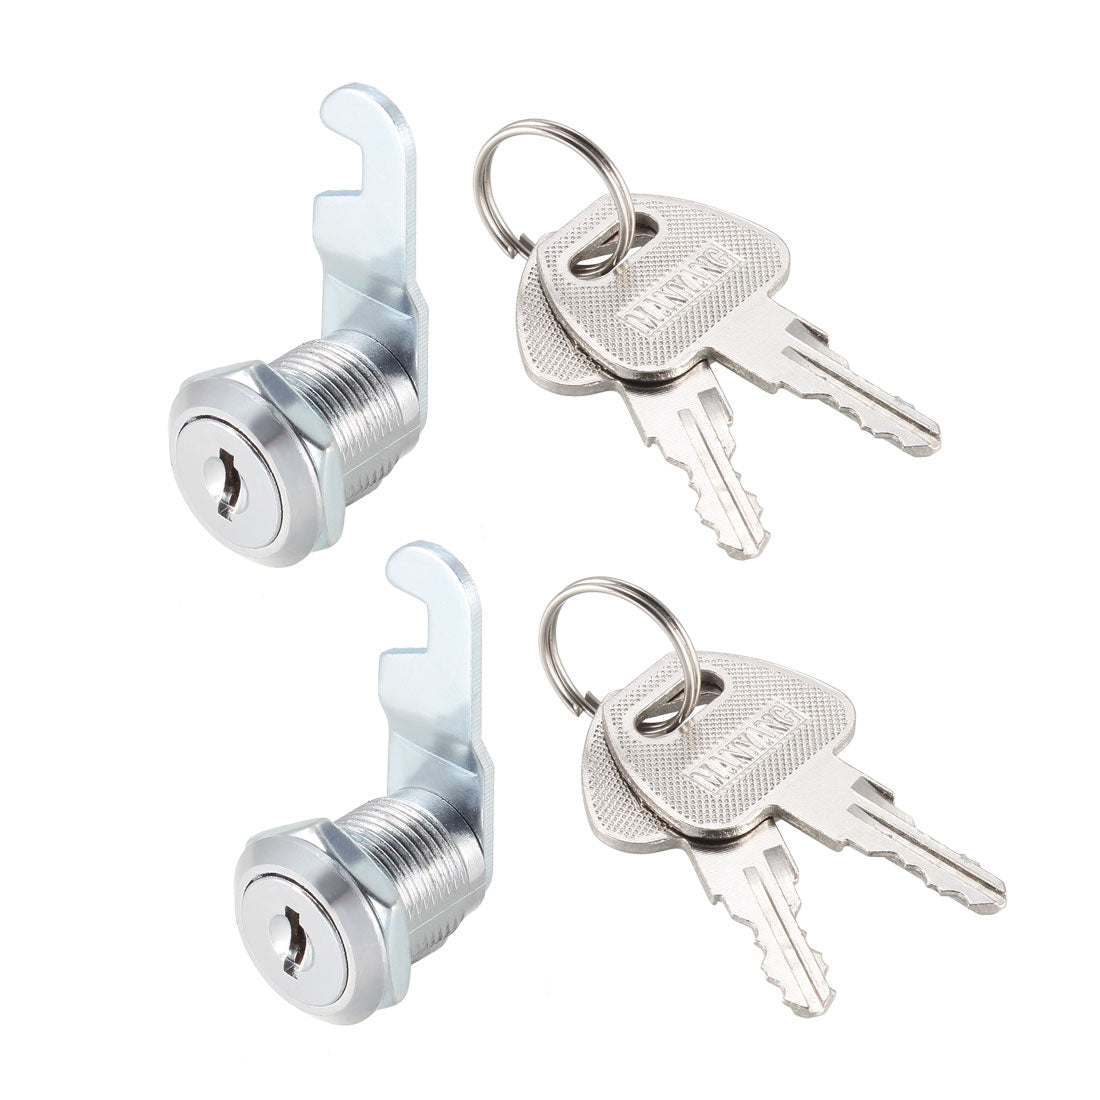 Uxcell Uxcell Cam Locks 35mm Cylinder Length for Max 30mm Panel Keyed Different 2Pcs